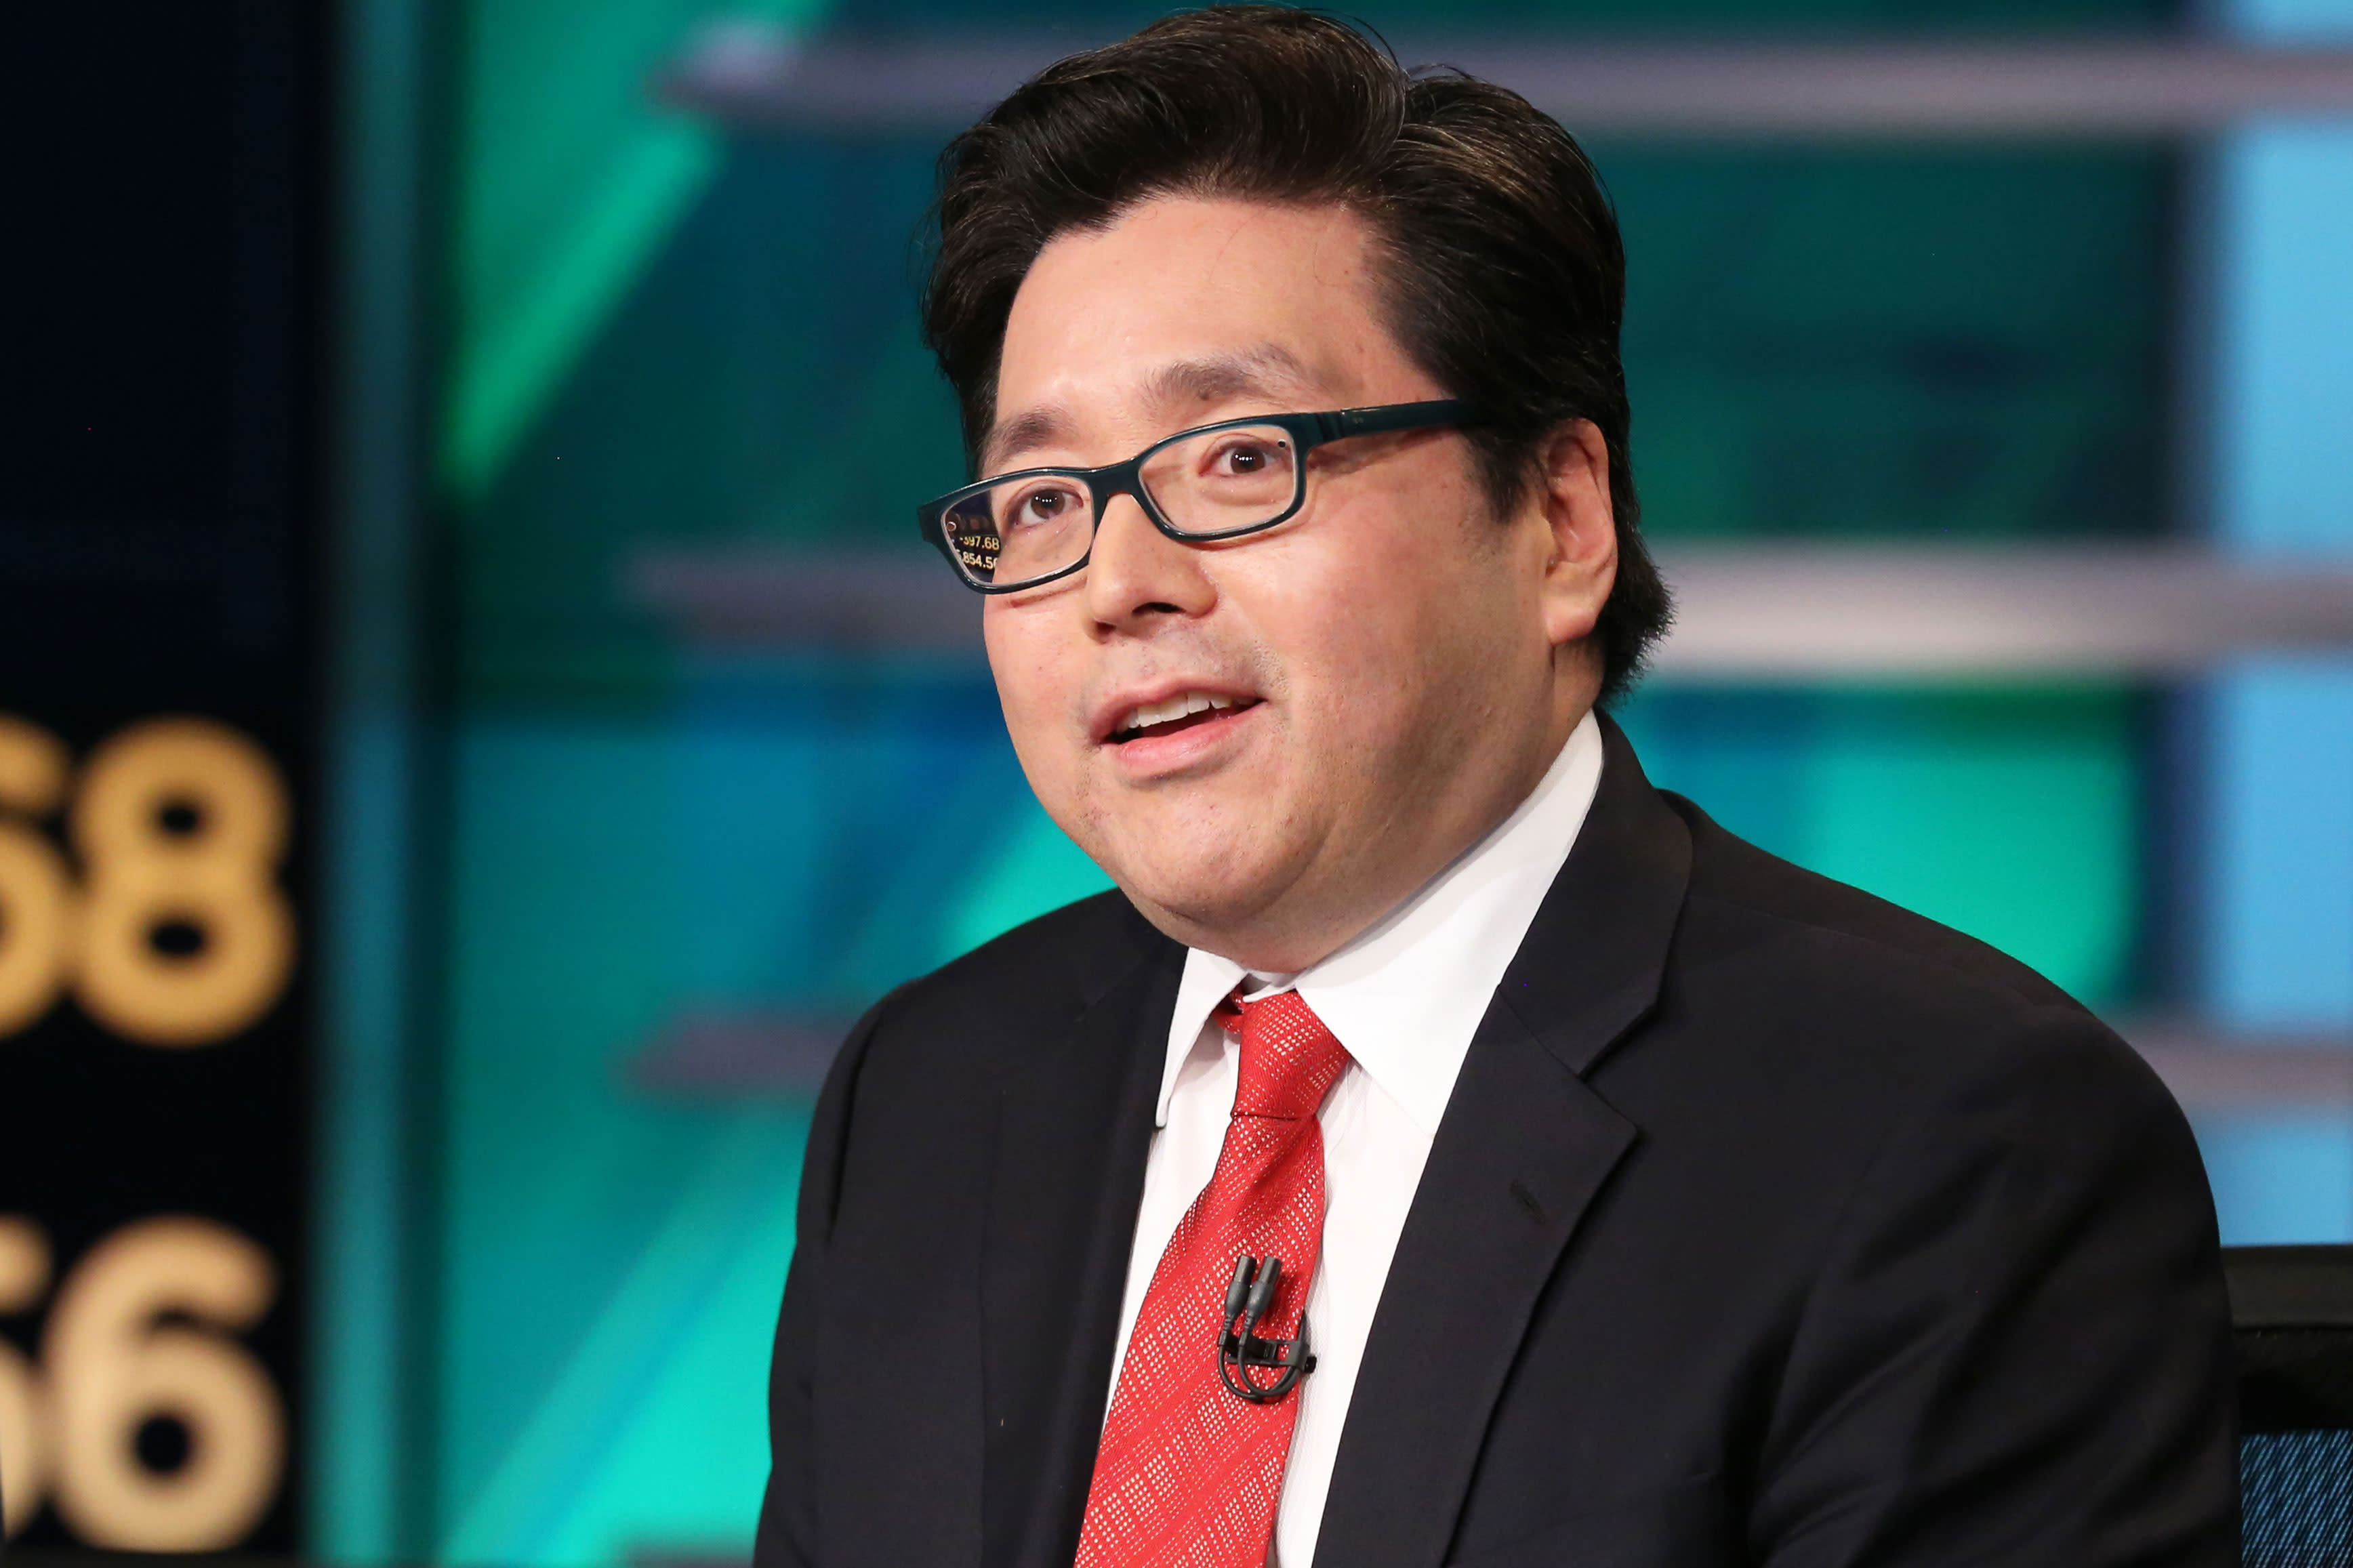 Fundstrat's Tom Lee sees a strong rally over the next 2 months as soft inflation data hits